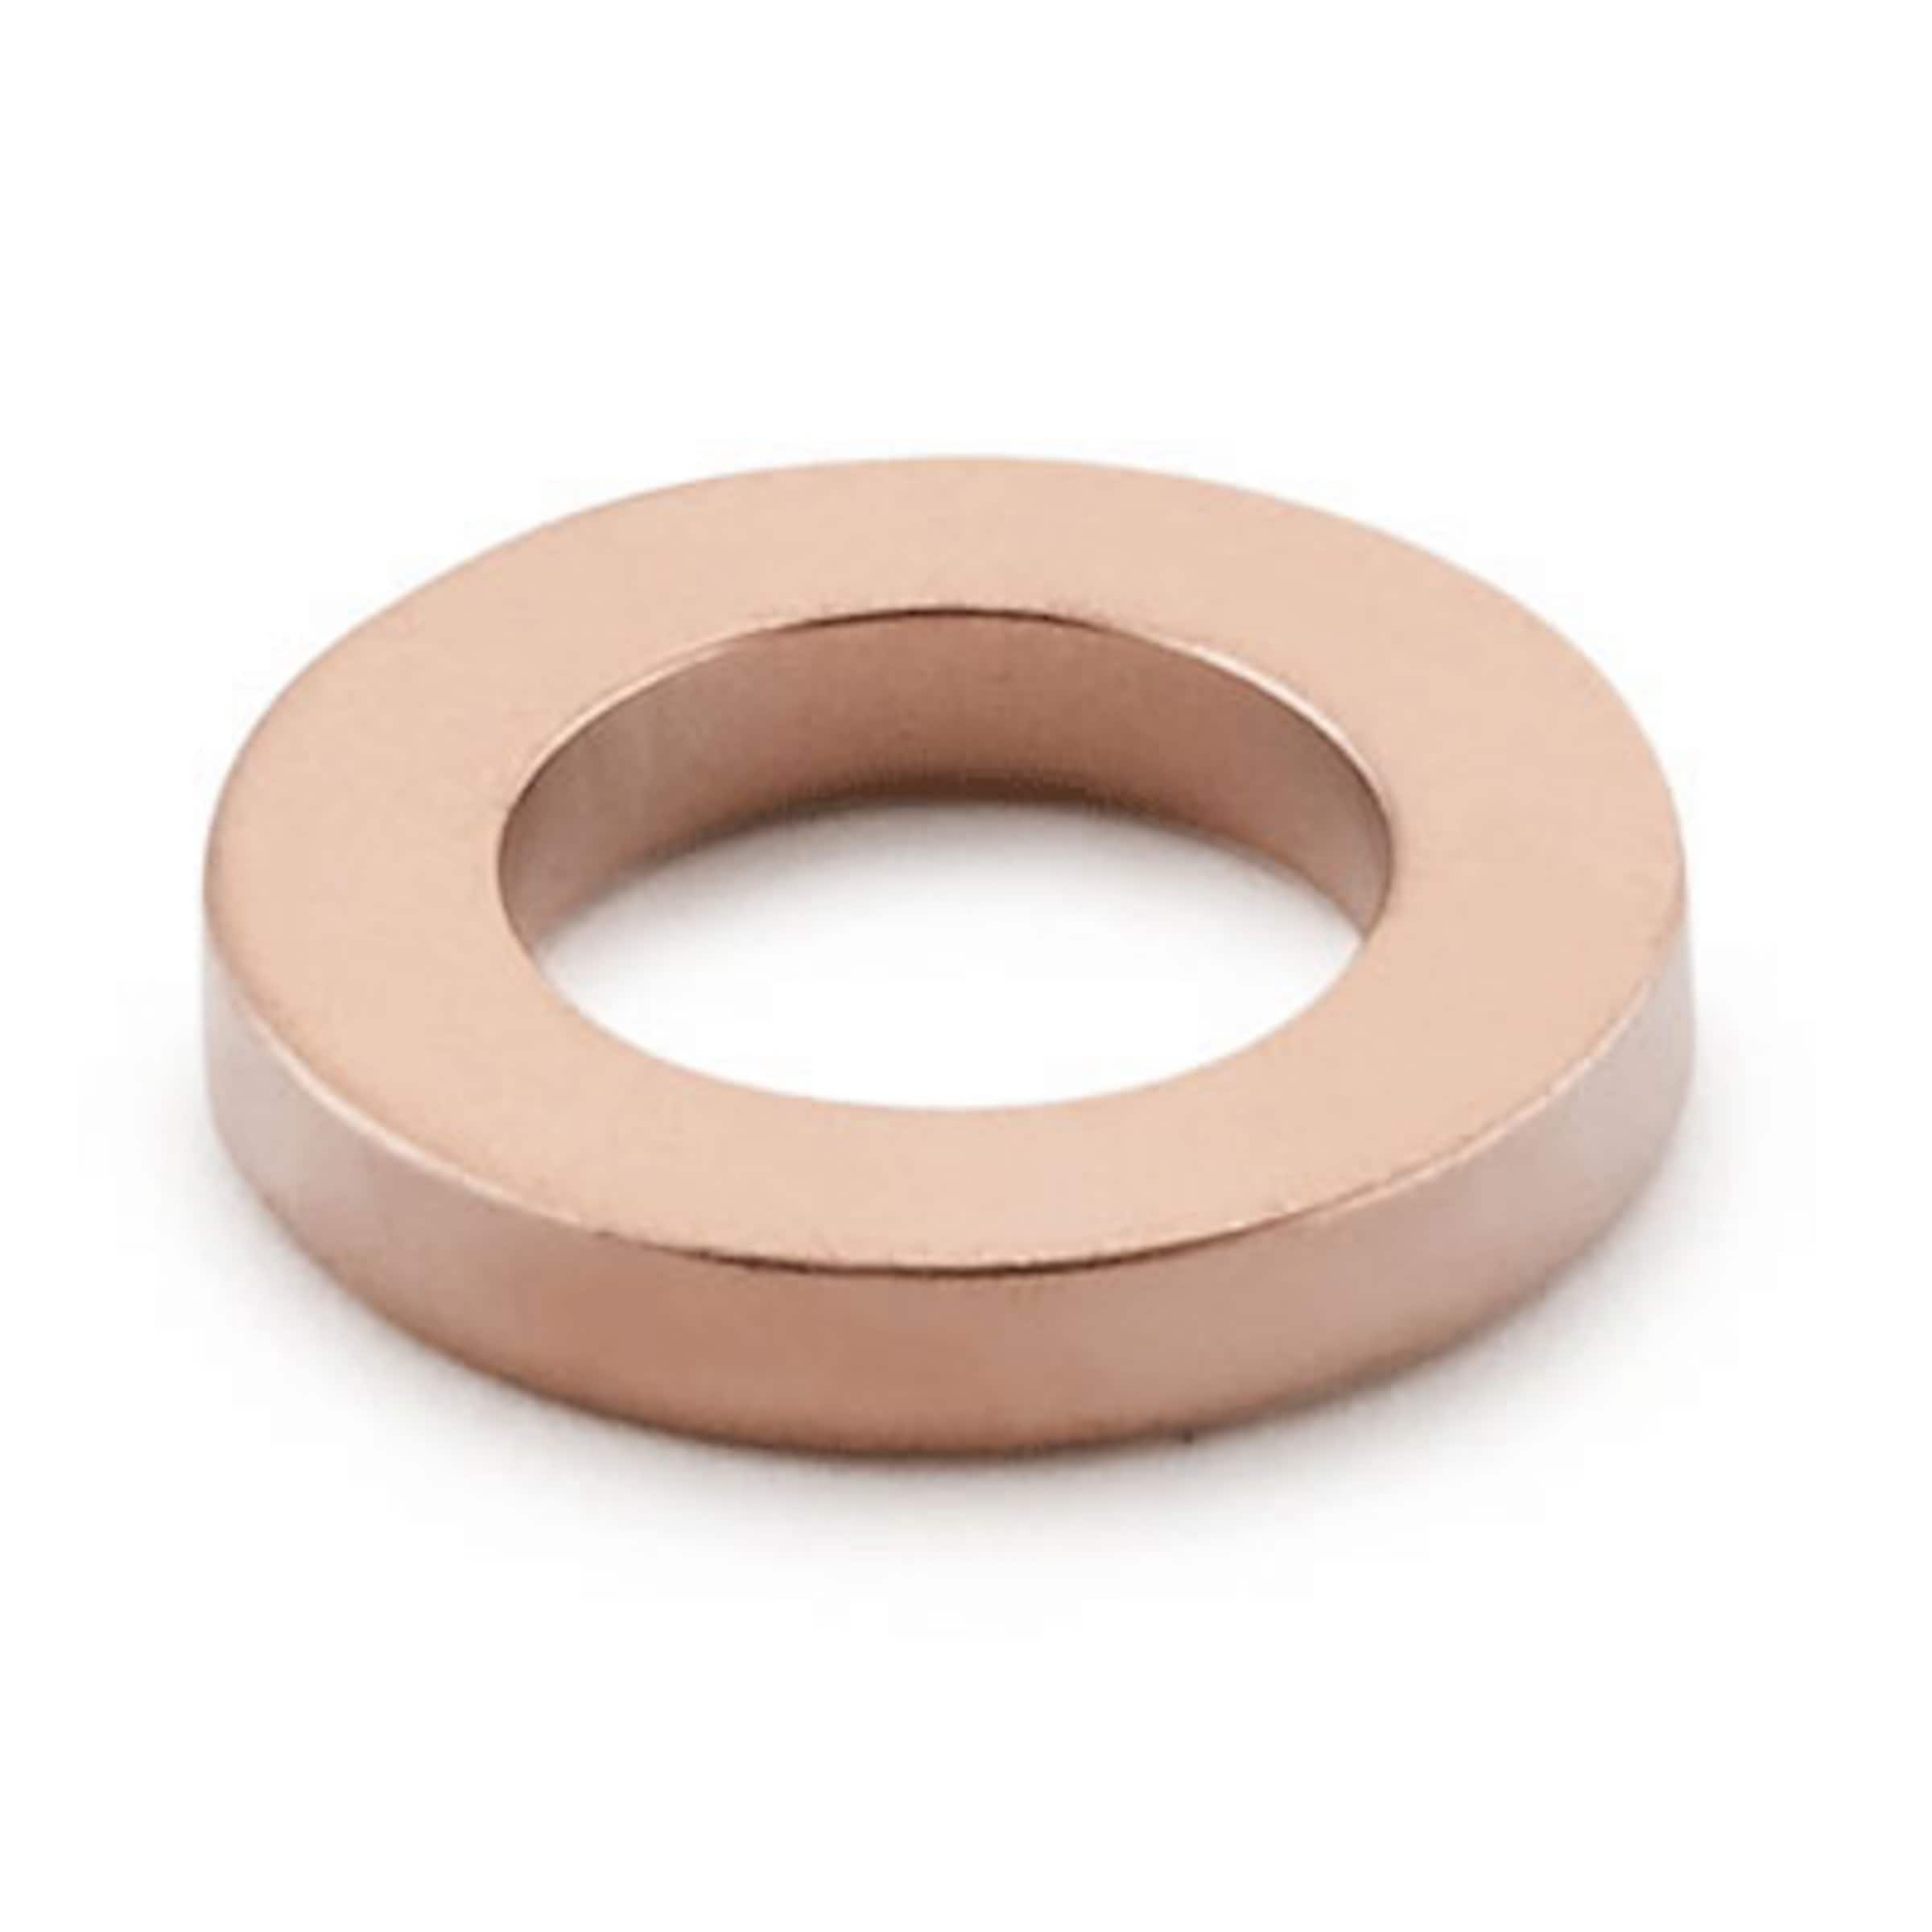 1/2 Inch Copper Pipe Fitting at Rs 10/piece